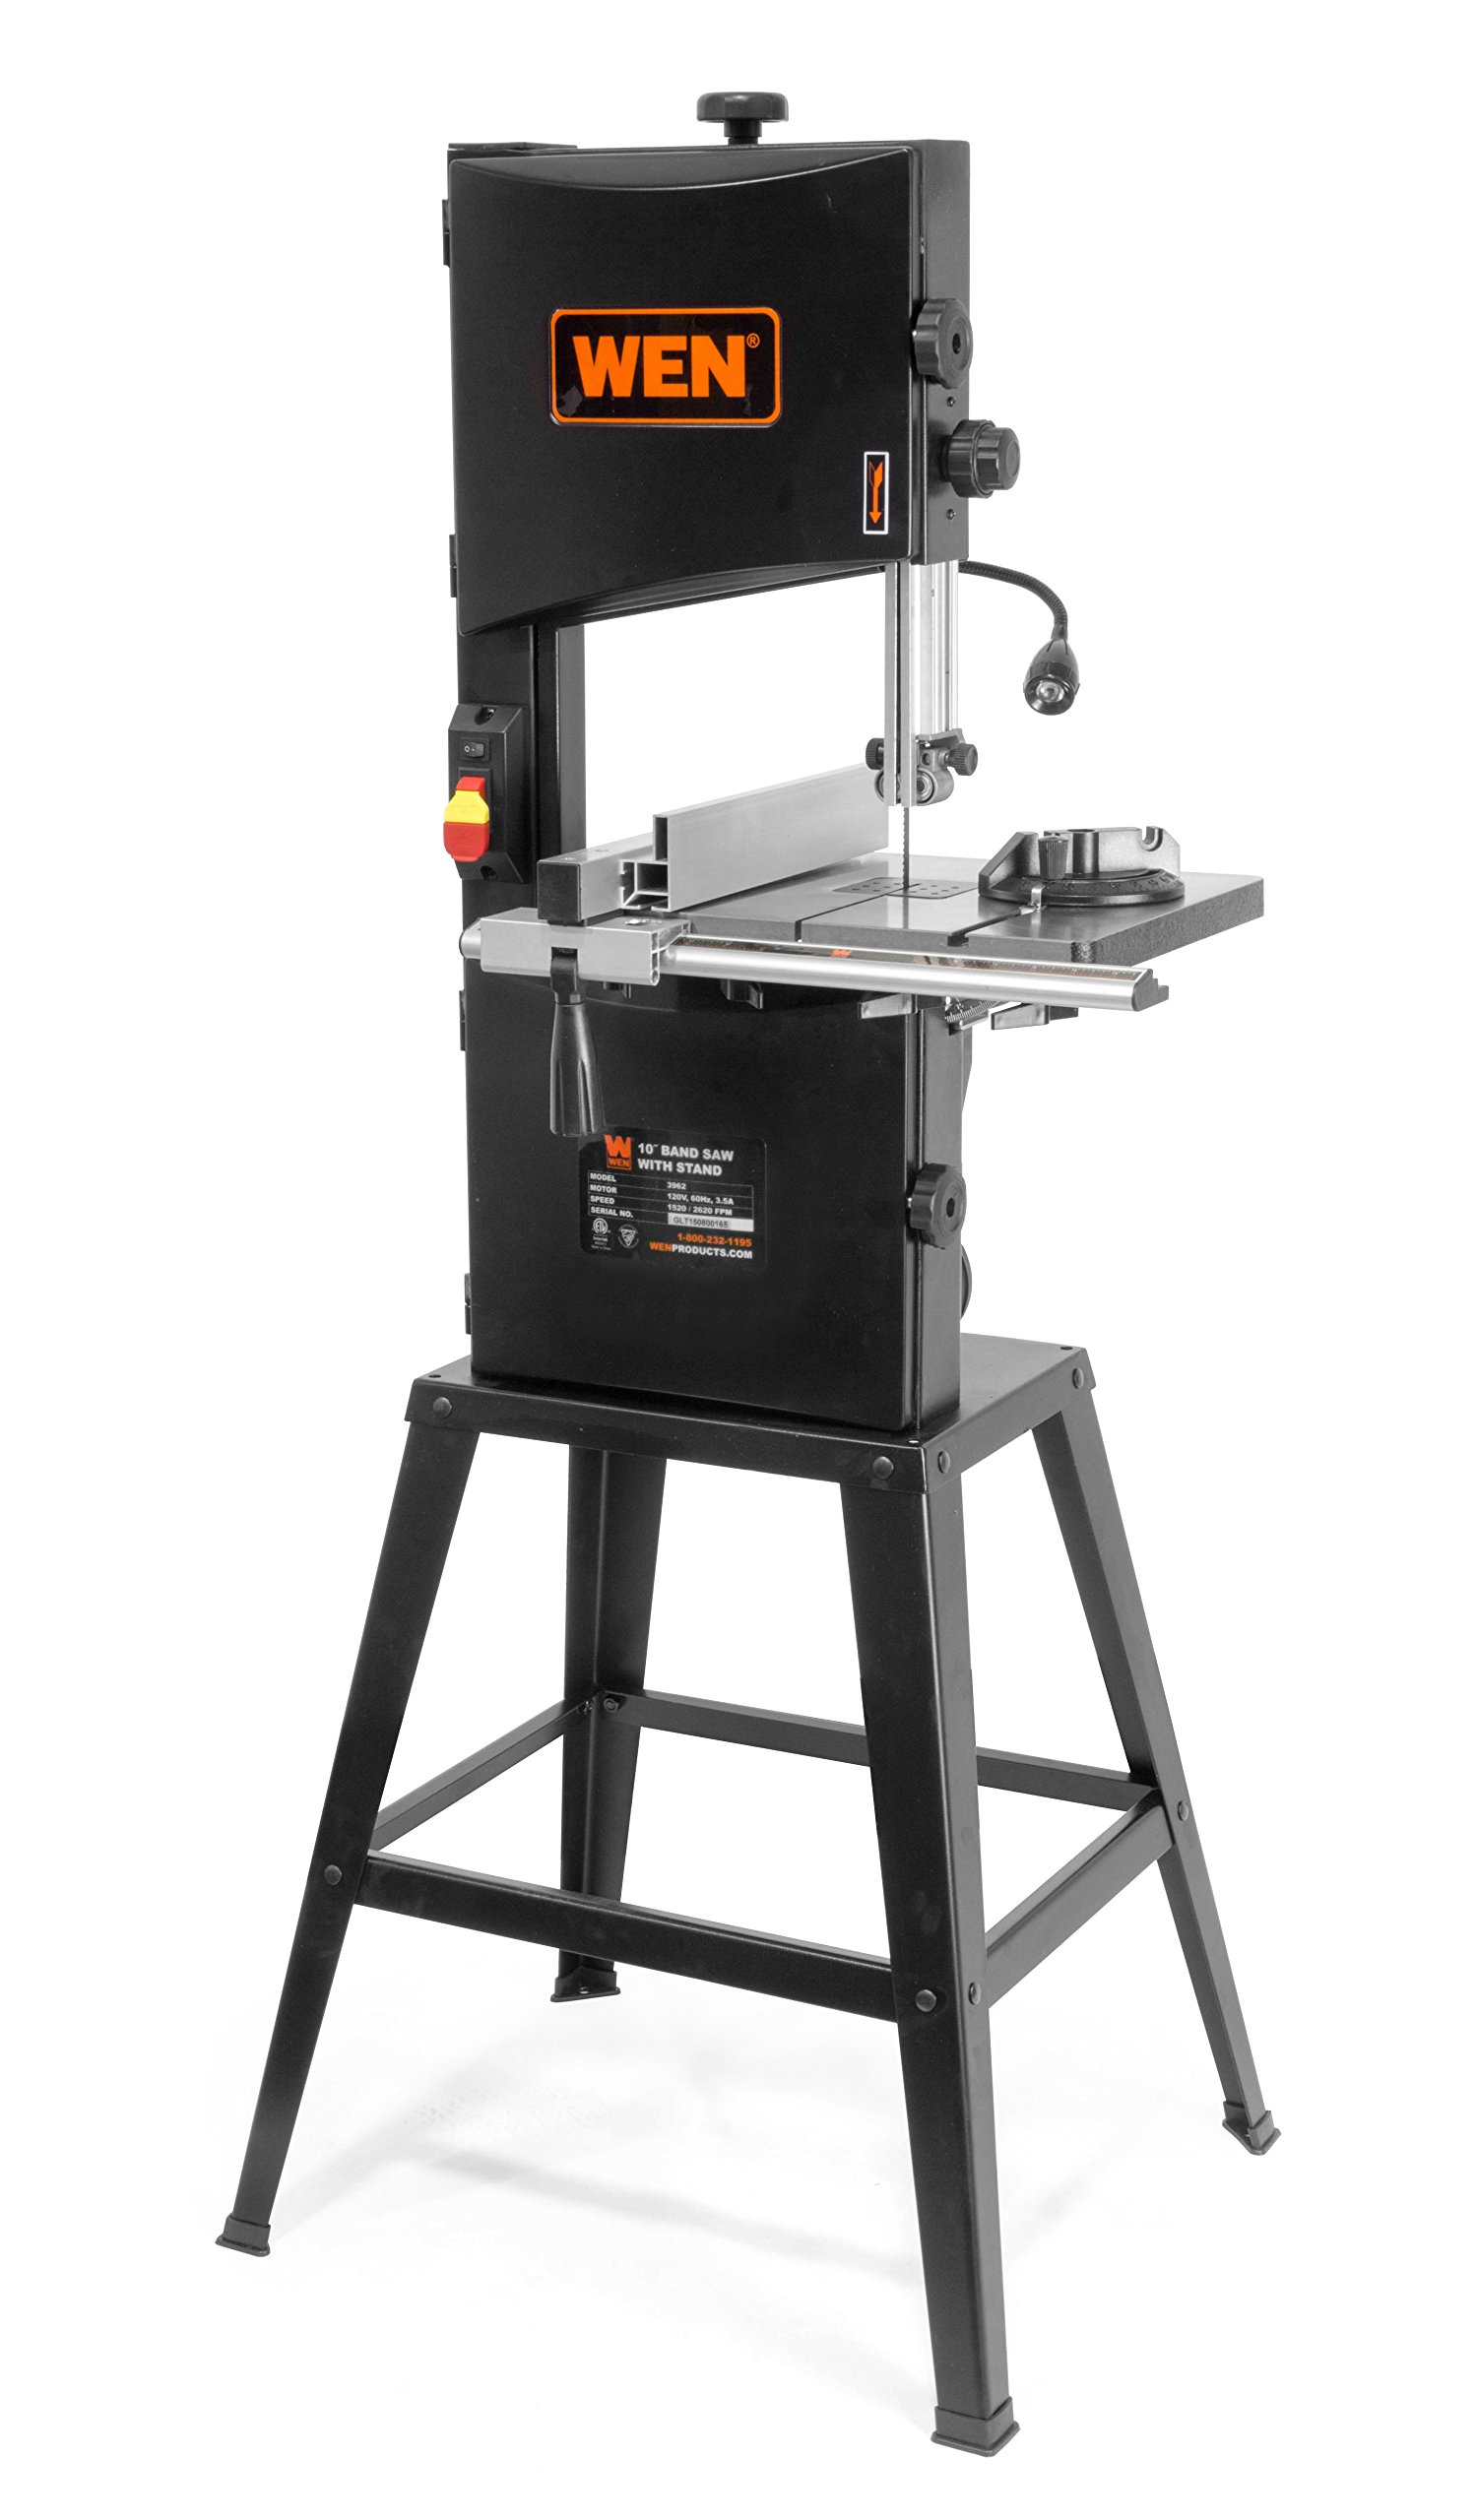 WEN BA3962 3.5-Amp 10-Inch Two-Speed Band Saw with Stand and Worklight